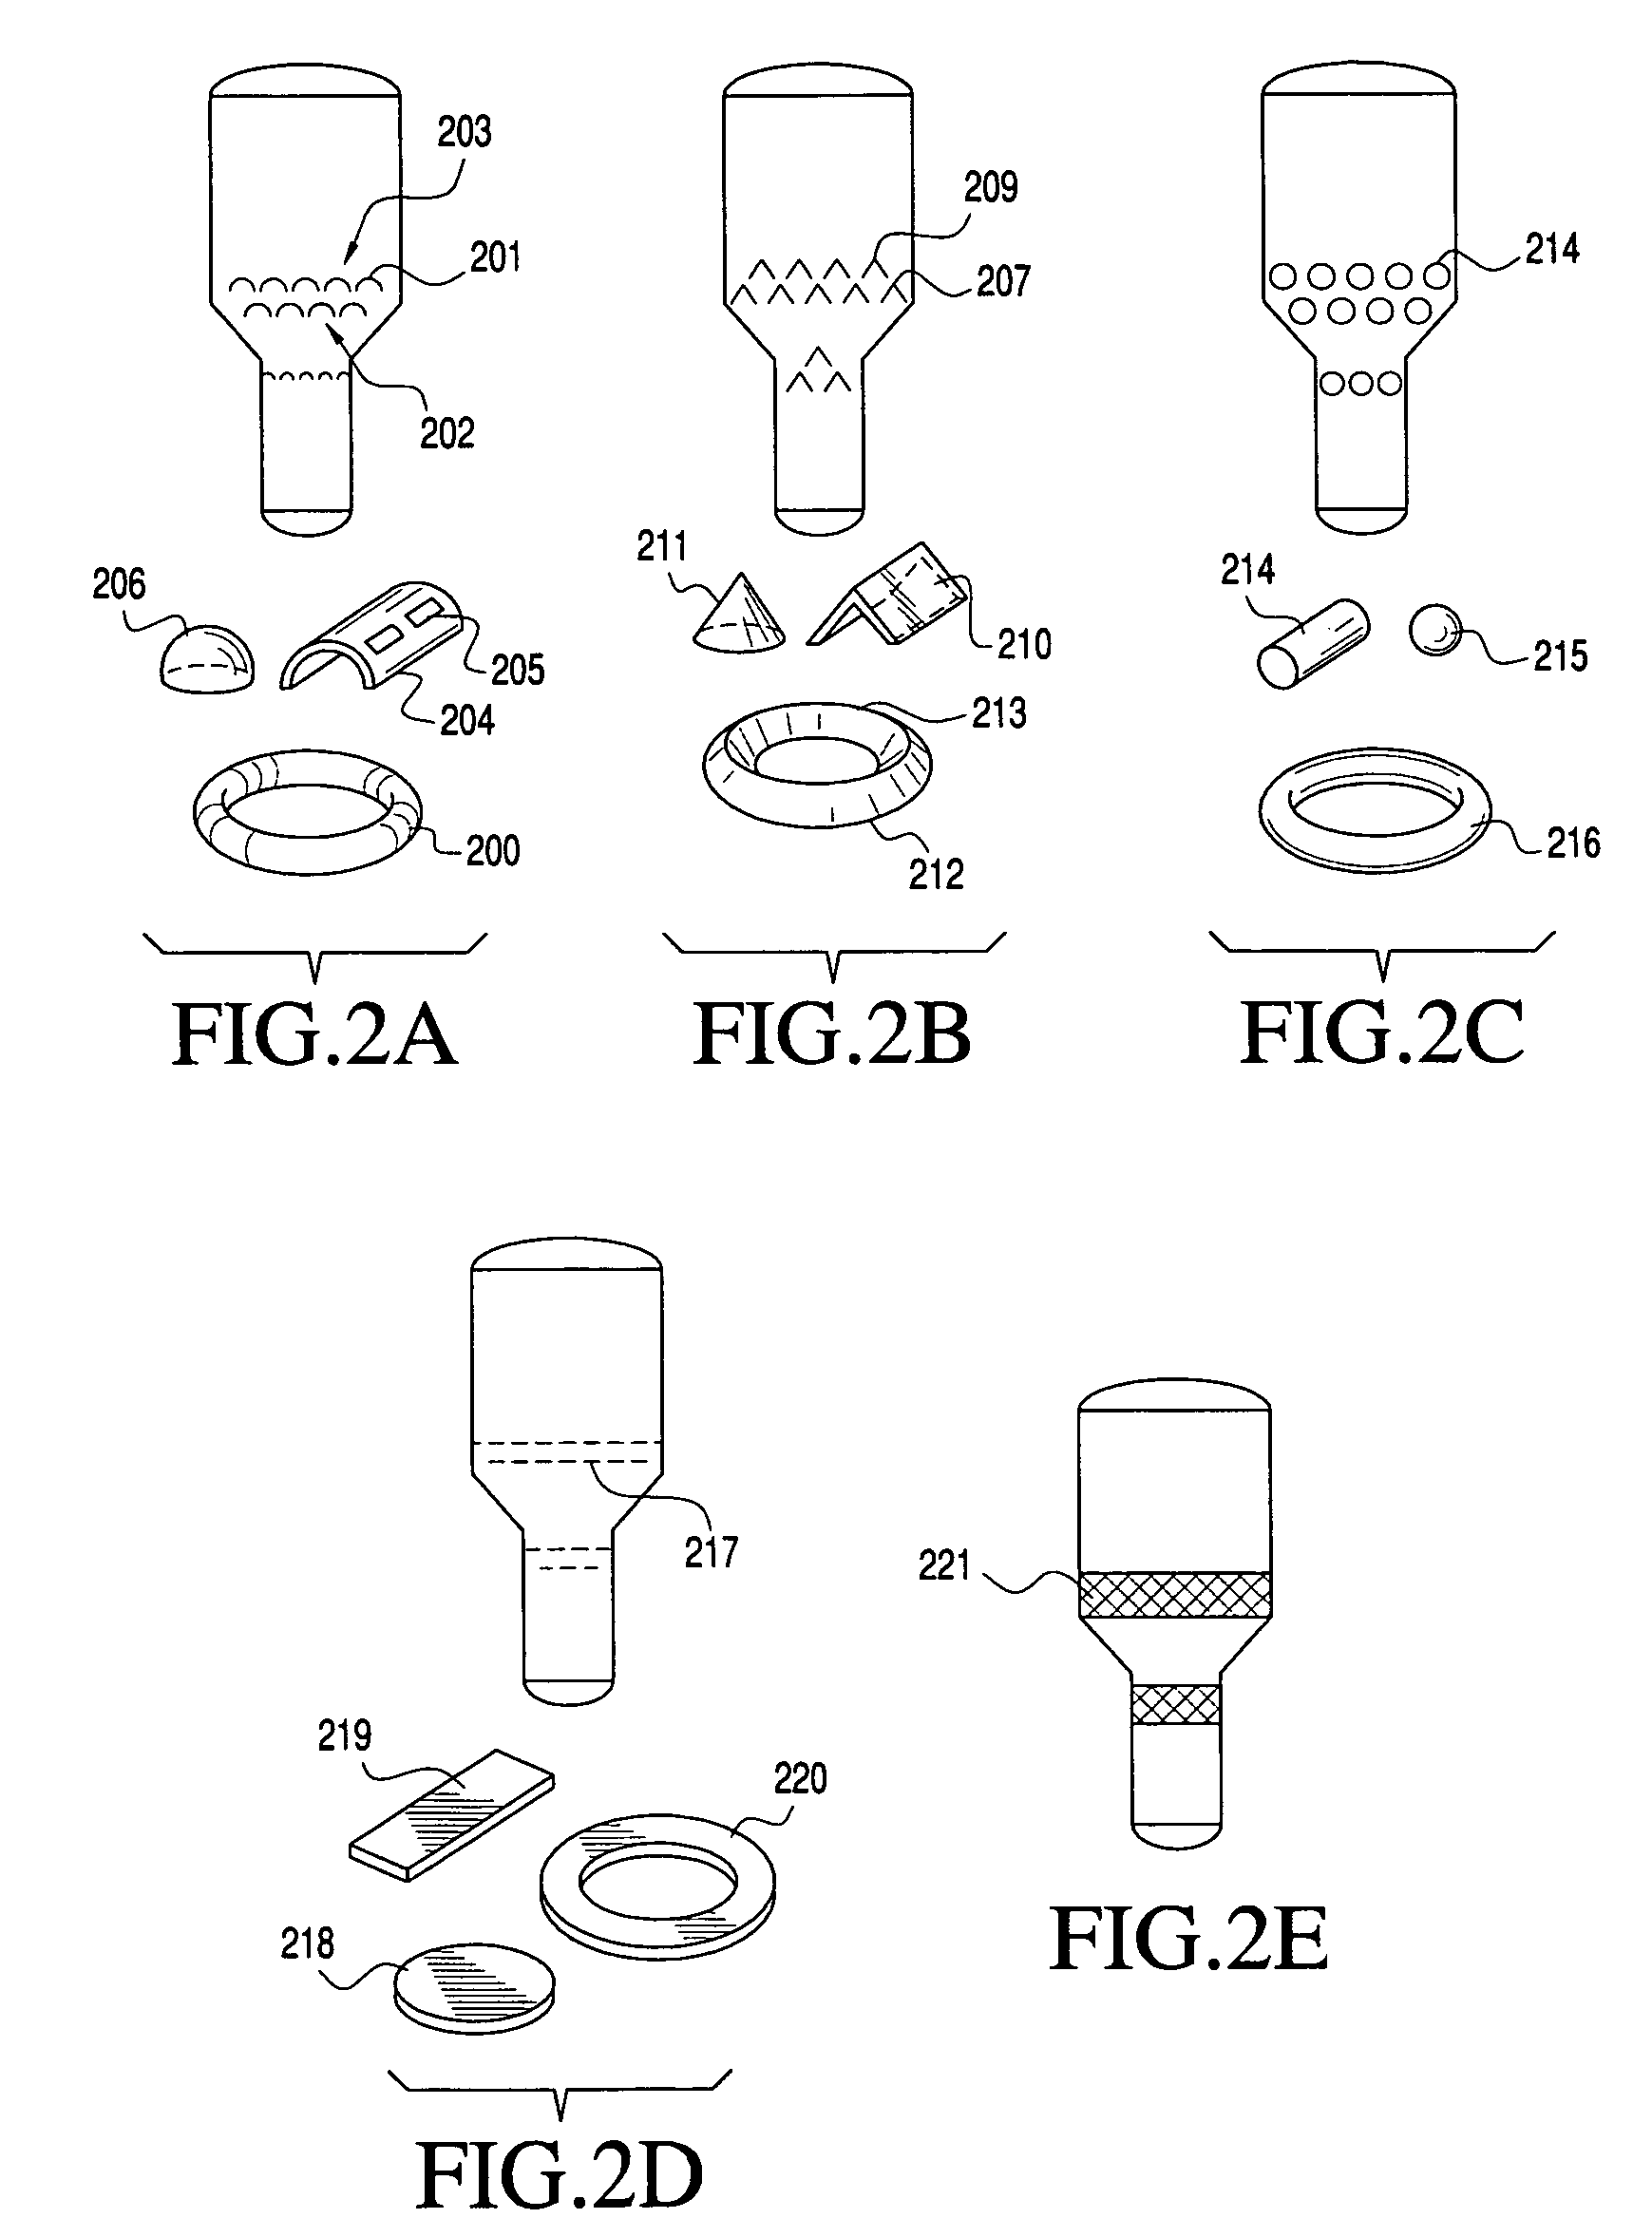 Fluidizing a population of catalyst particles having a low catalyst fines content